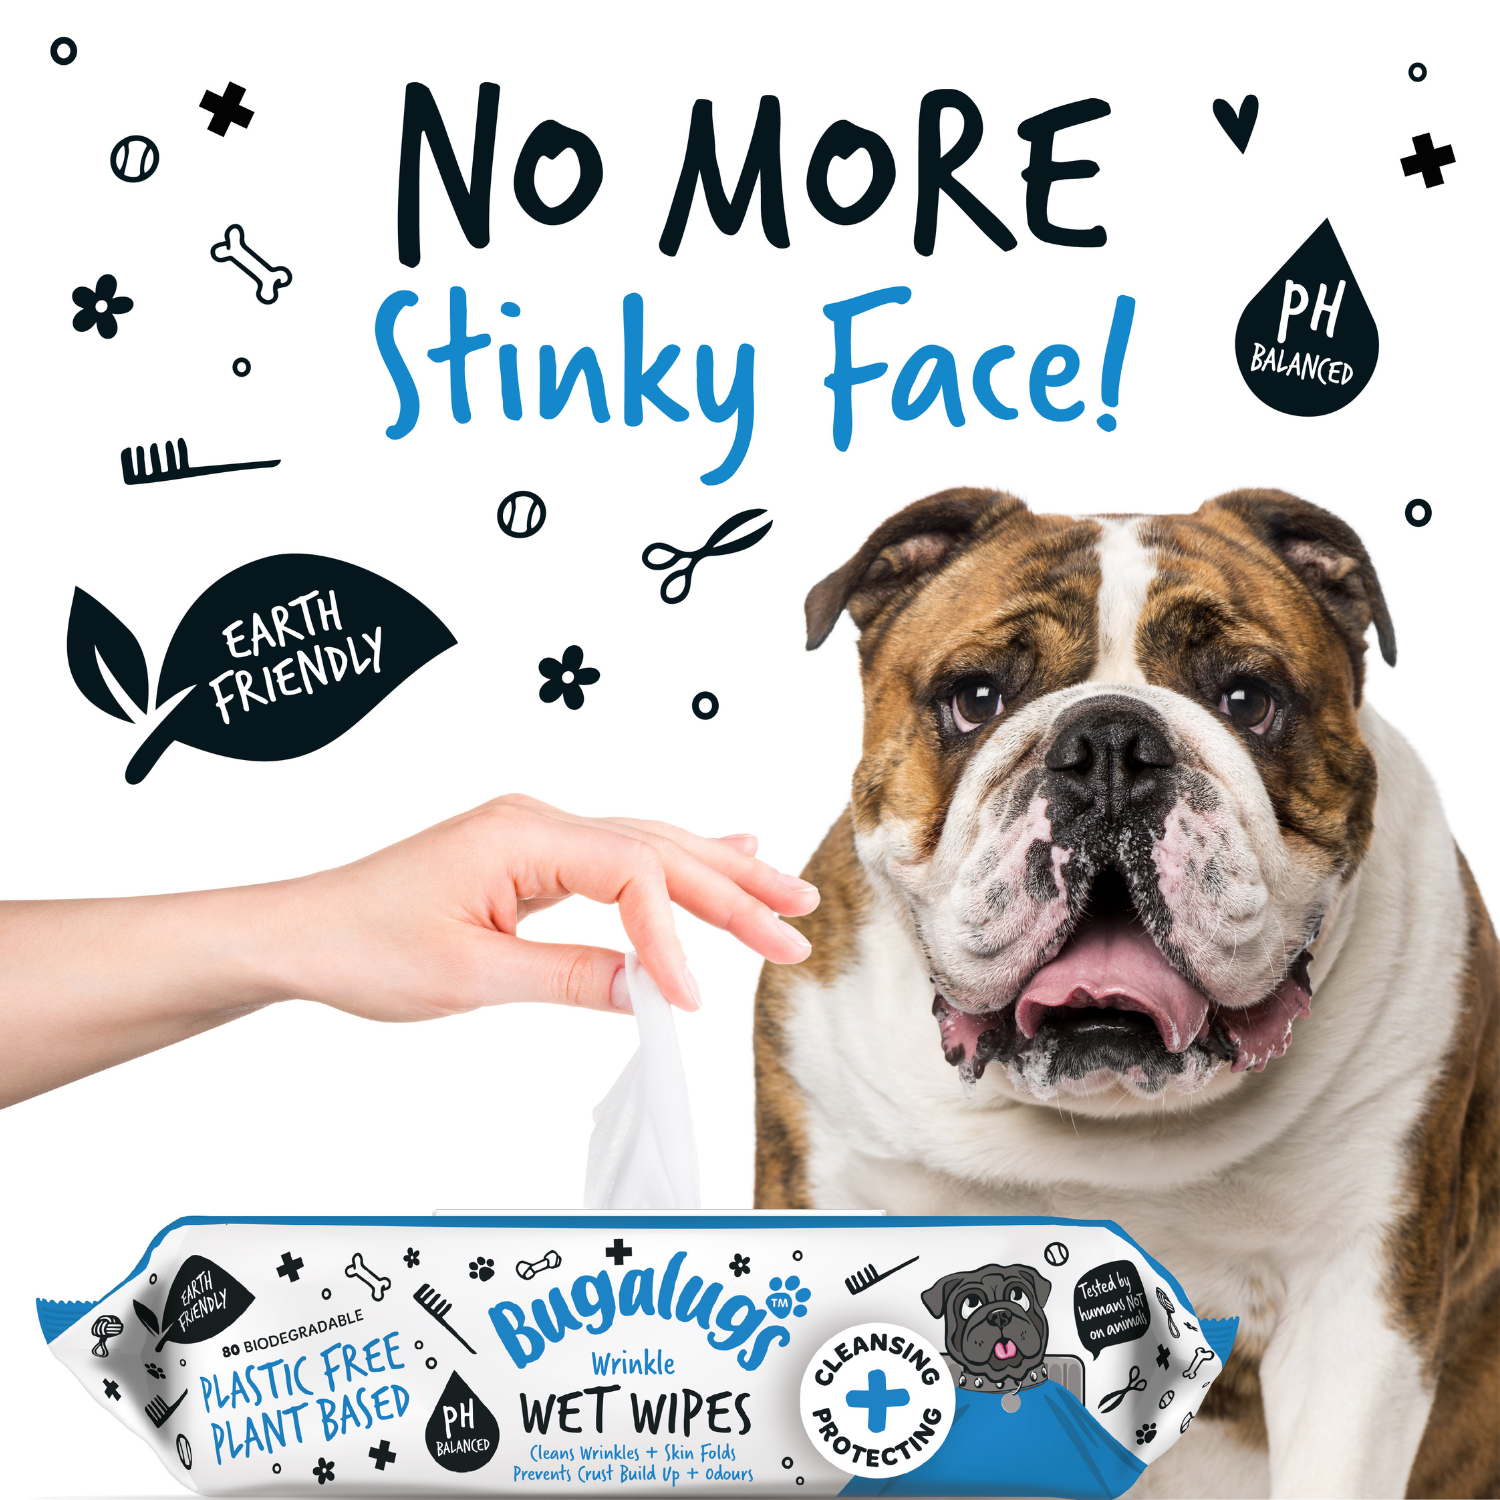 Bugalugs Wrinkle Wet Wipes for Dogs and Cats - No more stinky face